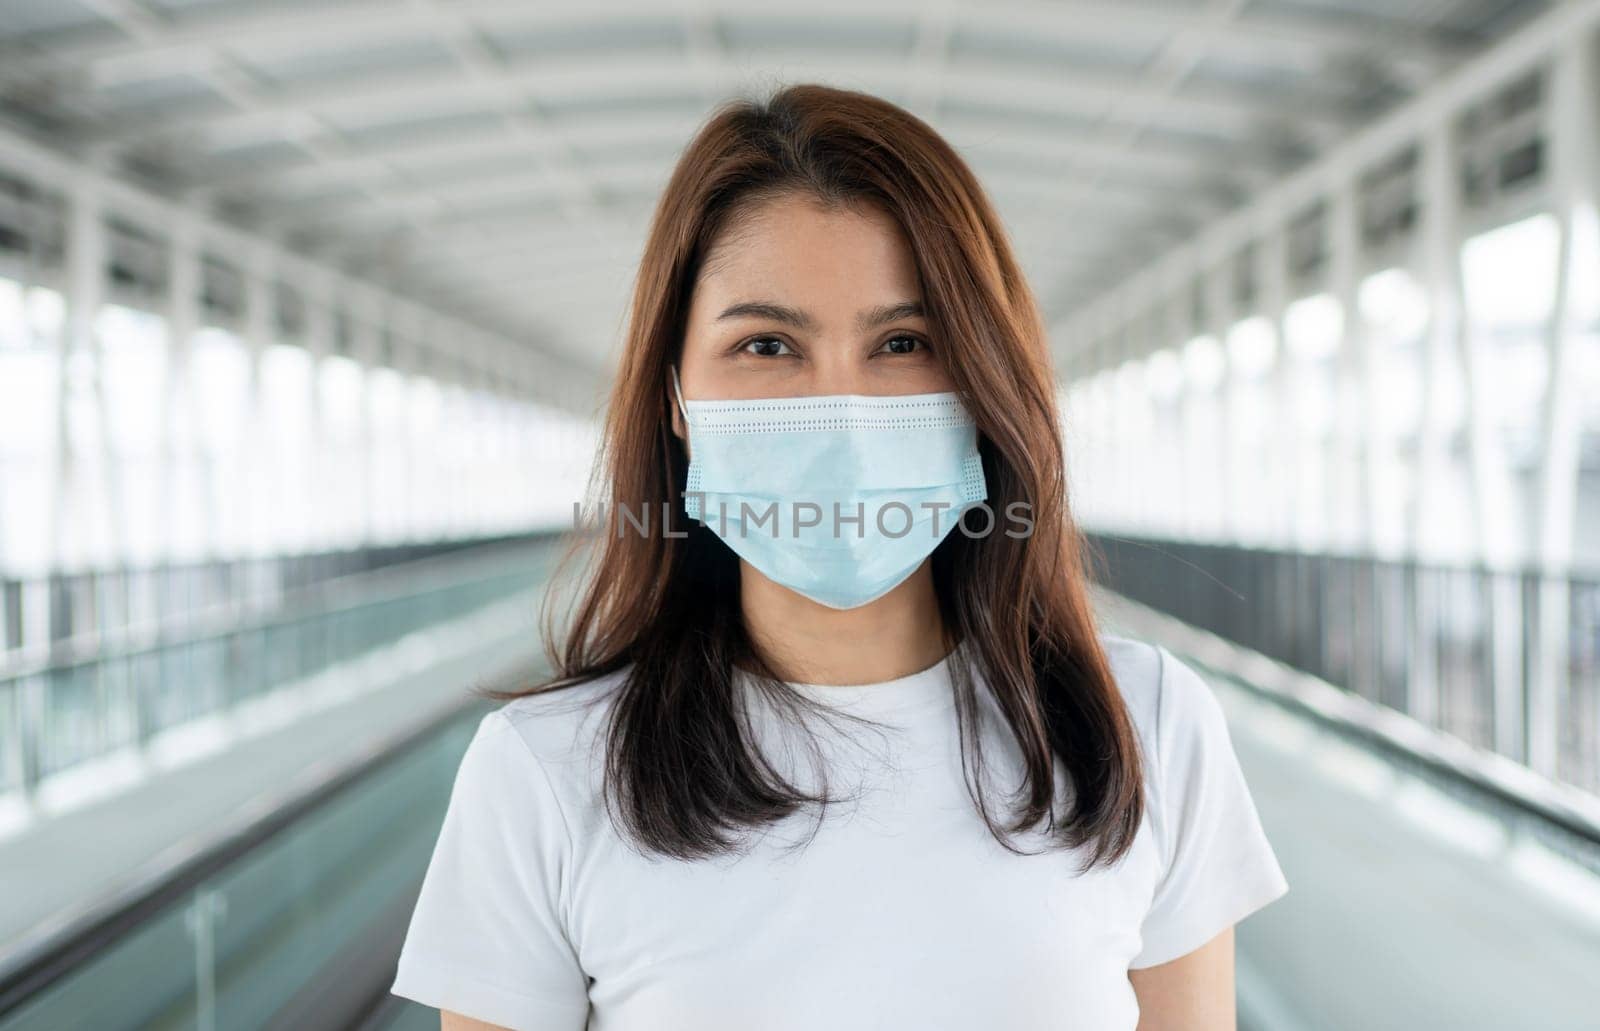 Portrait of a young woman in a medical mask for anti-coronavirus COVID-19 pandemic infectious disease outbreak protection in Public area. Concept of Virus pandemic and pollution (PM2.5) by PattyPhoto